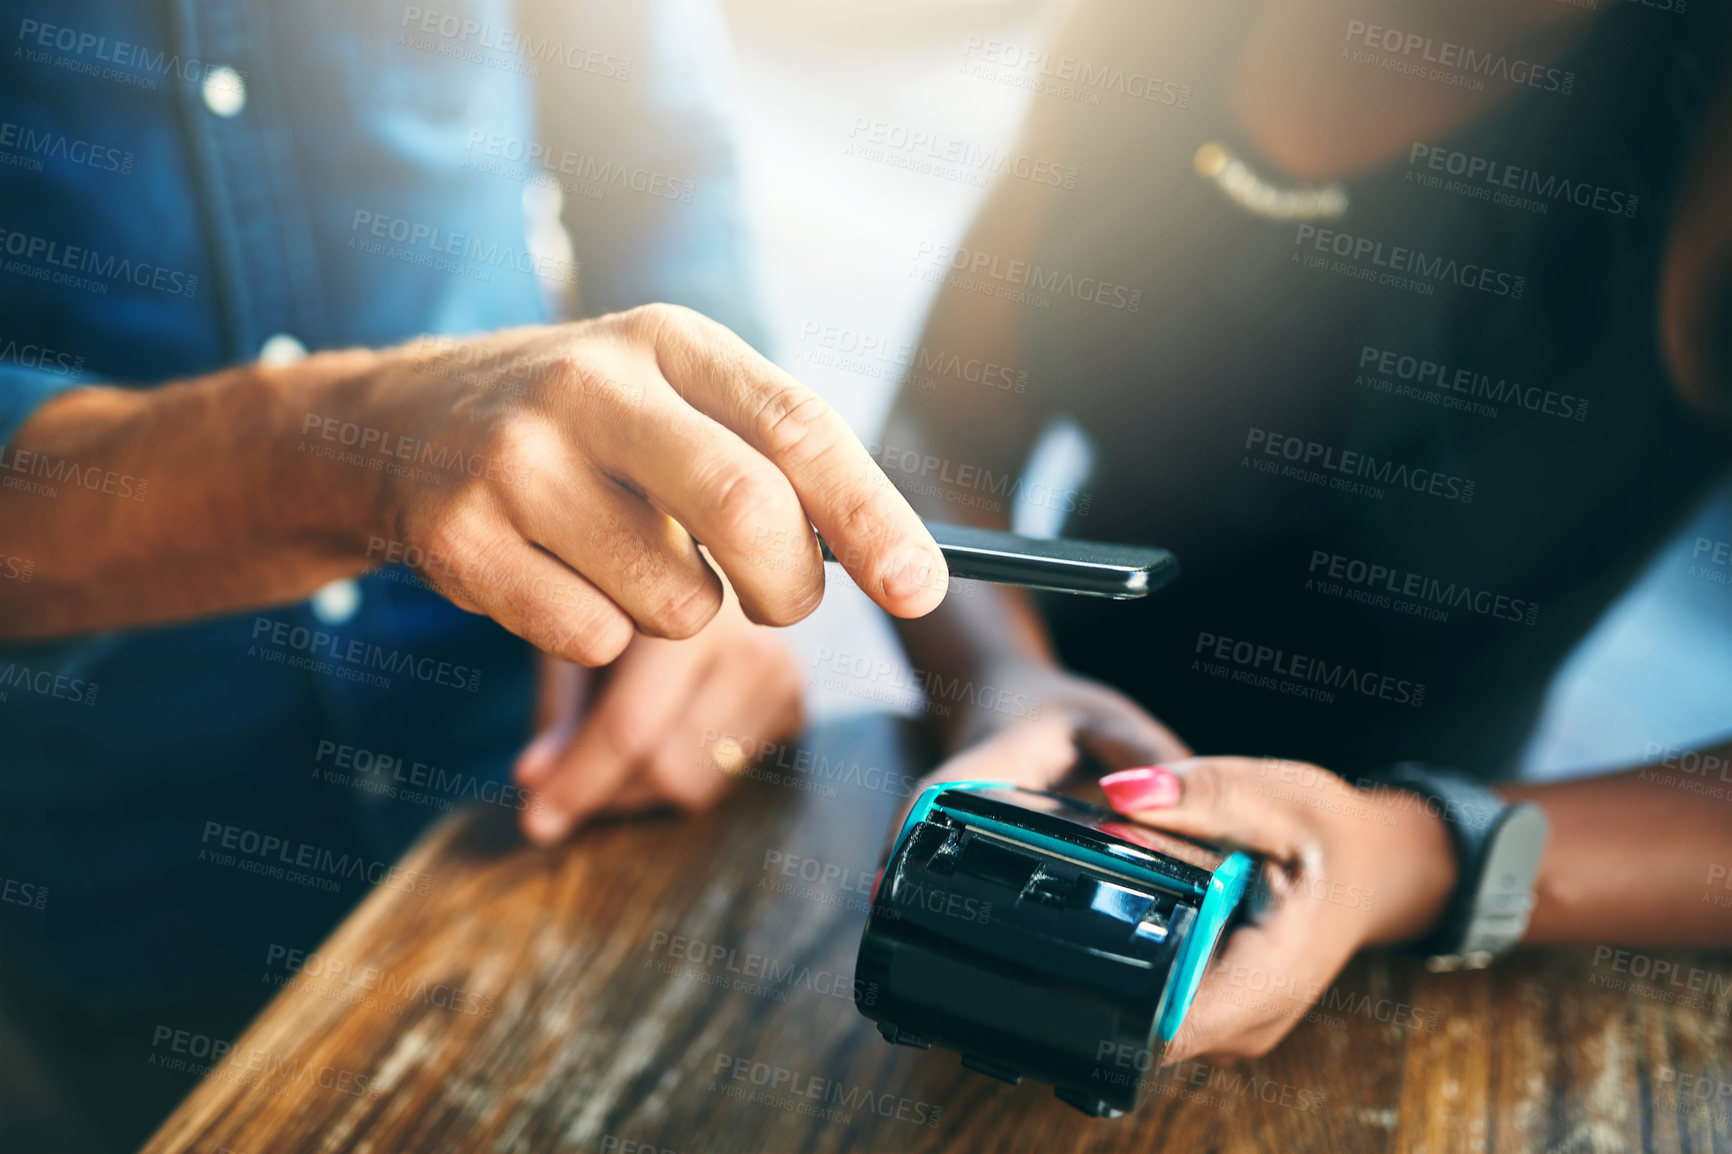 Buy stock photo Cropped shot of an unrecognizable businessman scanning his cellphone to pay for his bill in a cafe